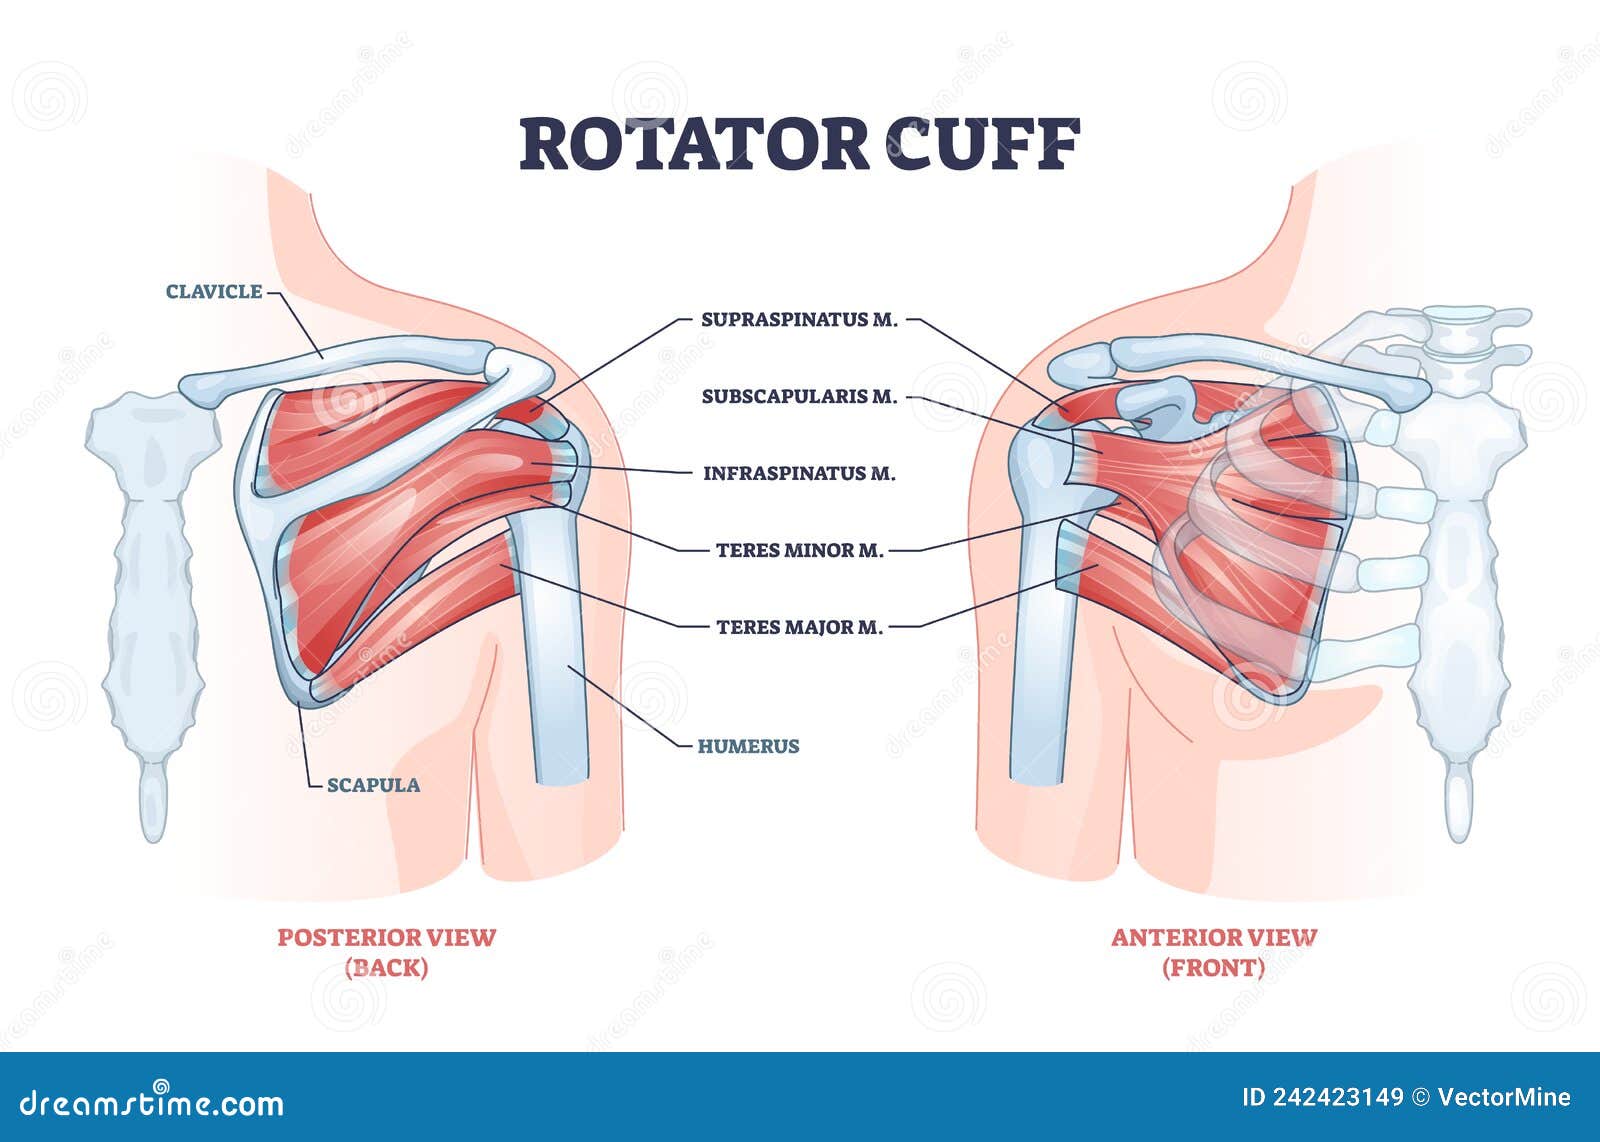 rotator cuff anatomical structure and location explanation outline diagram